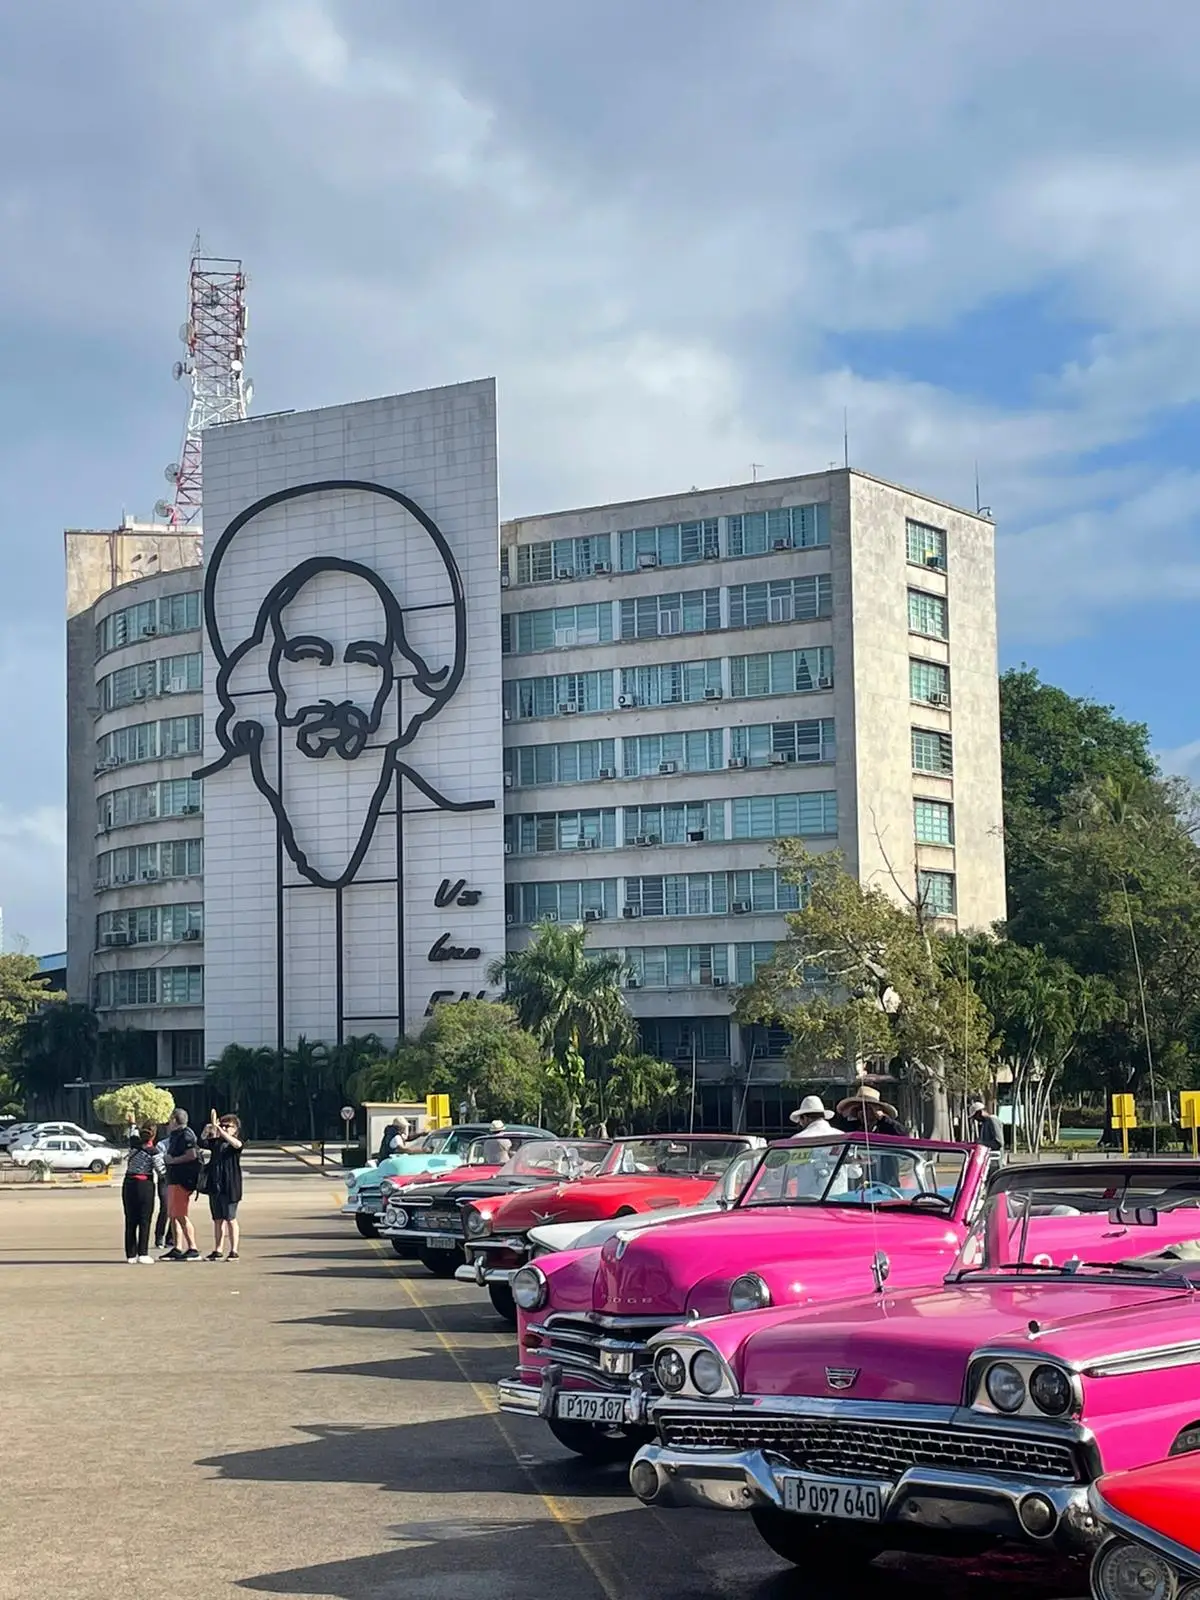 tour and excursion on classic car in cuba